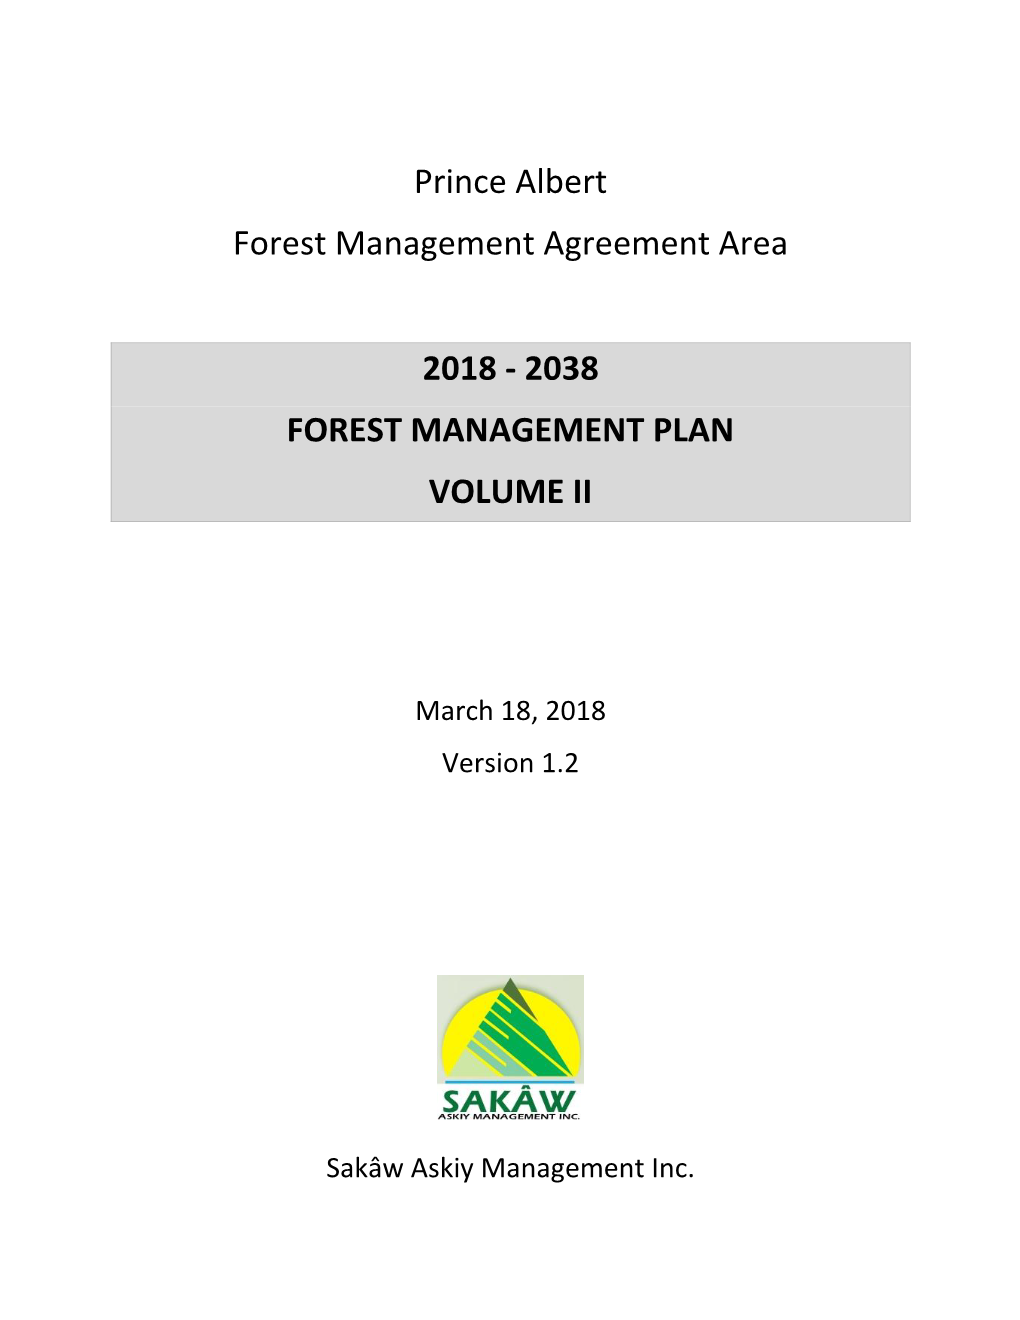 Prince Albert Forest Management Agreement Area 2018